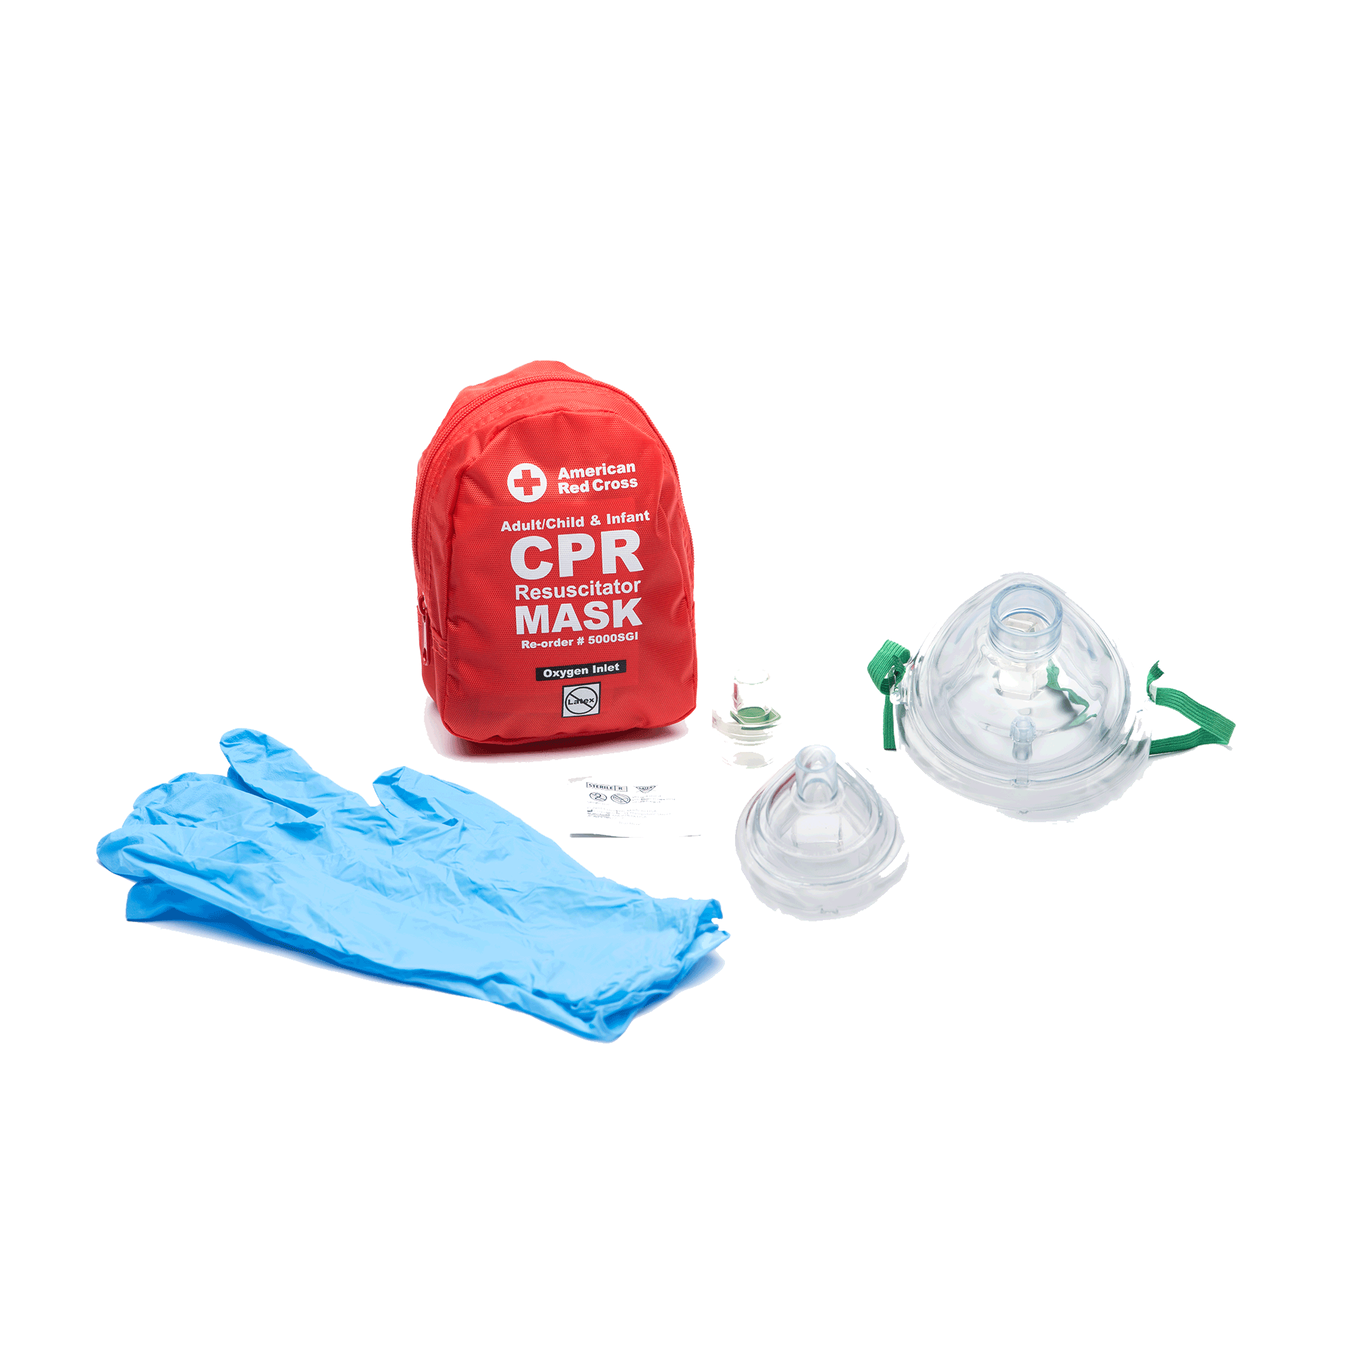 American Red Cross Adult Child and Infant CPR Mask Resuscitator Rescue